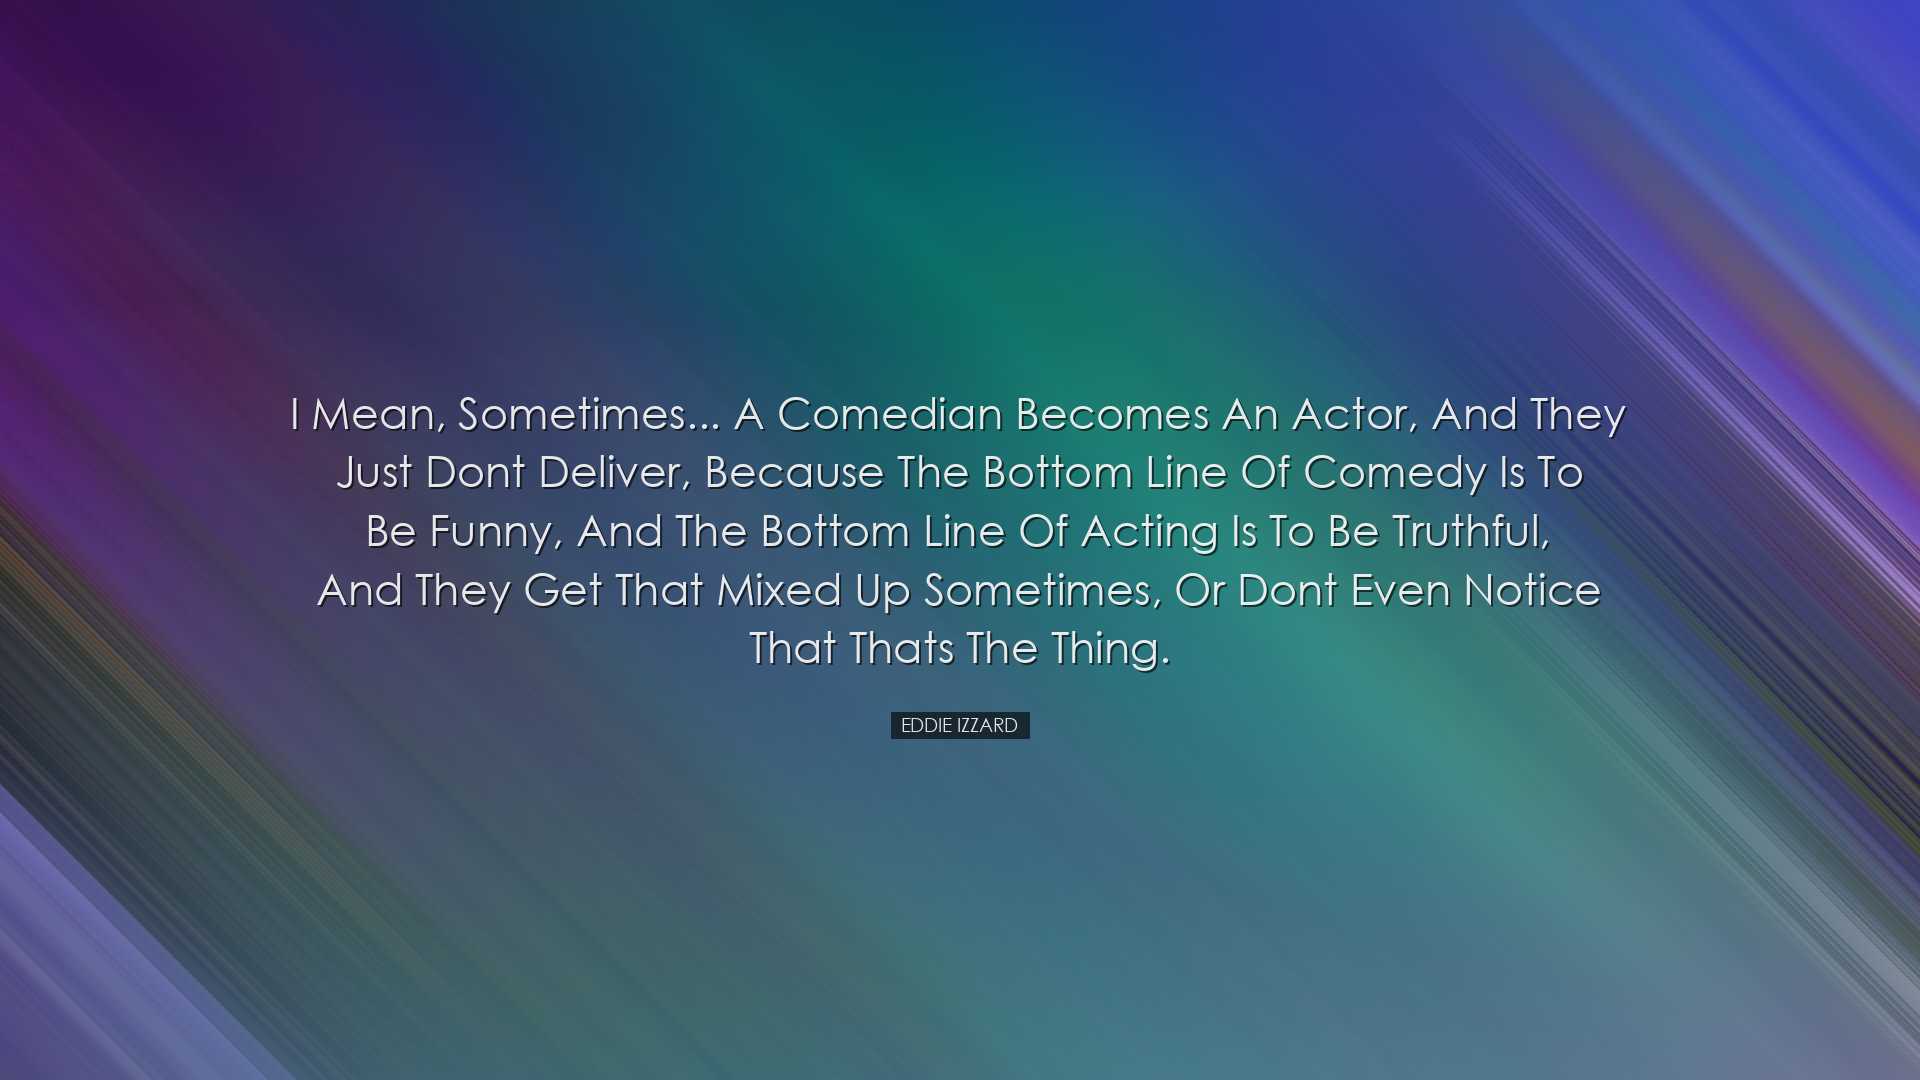 I mean, sometimes... a comedian becomes an actor, and they just do